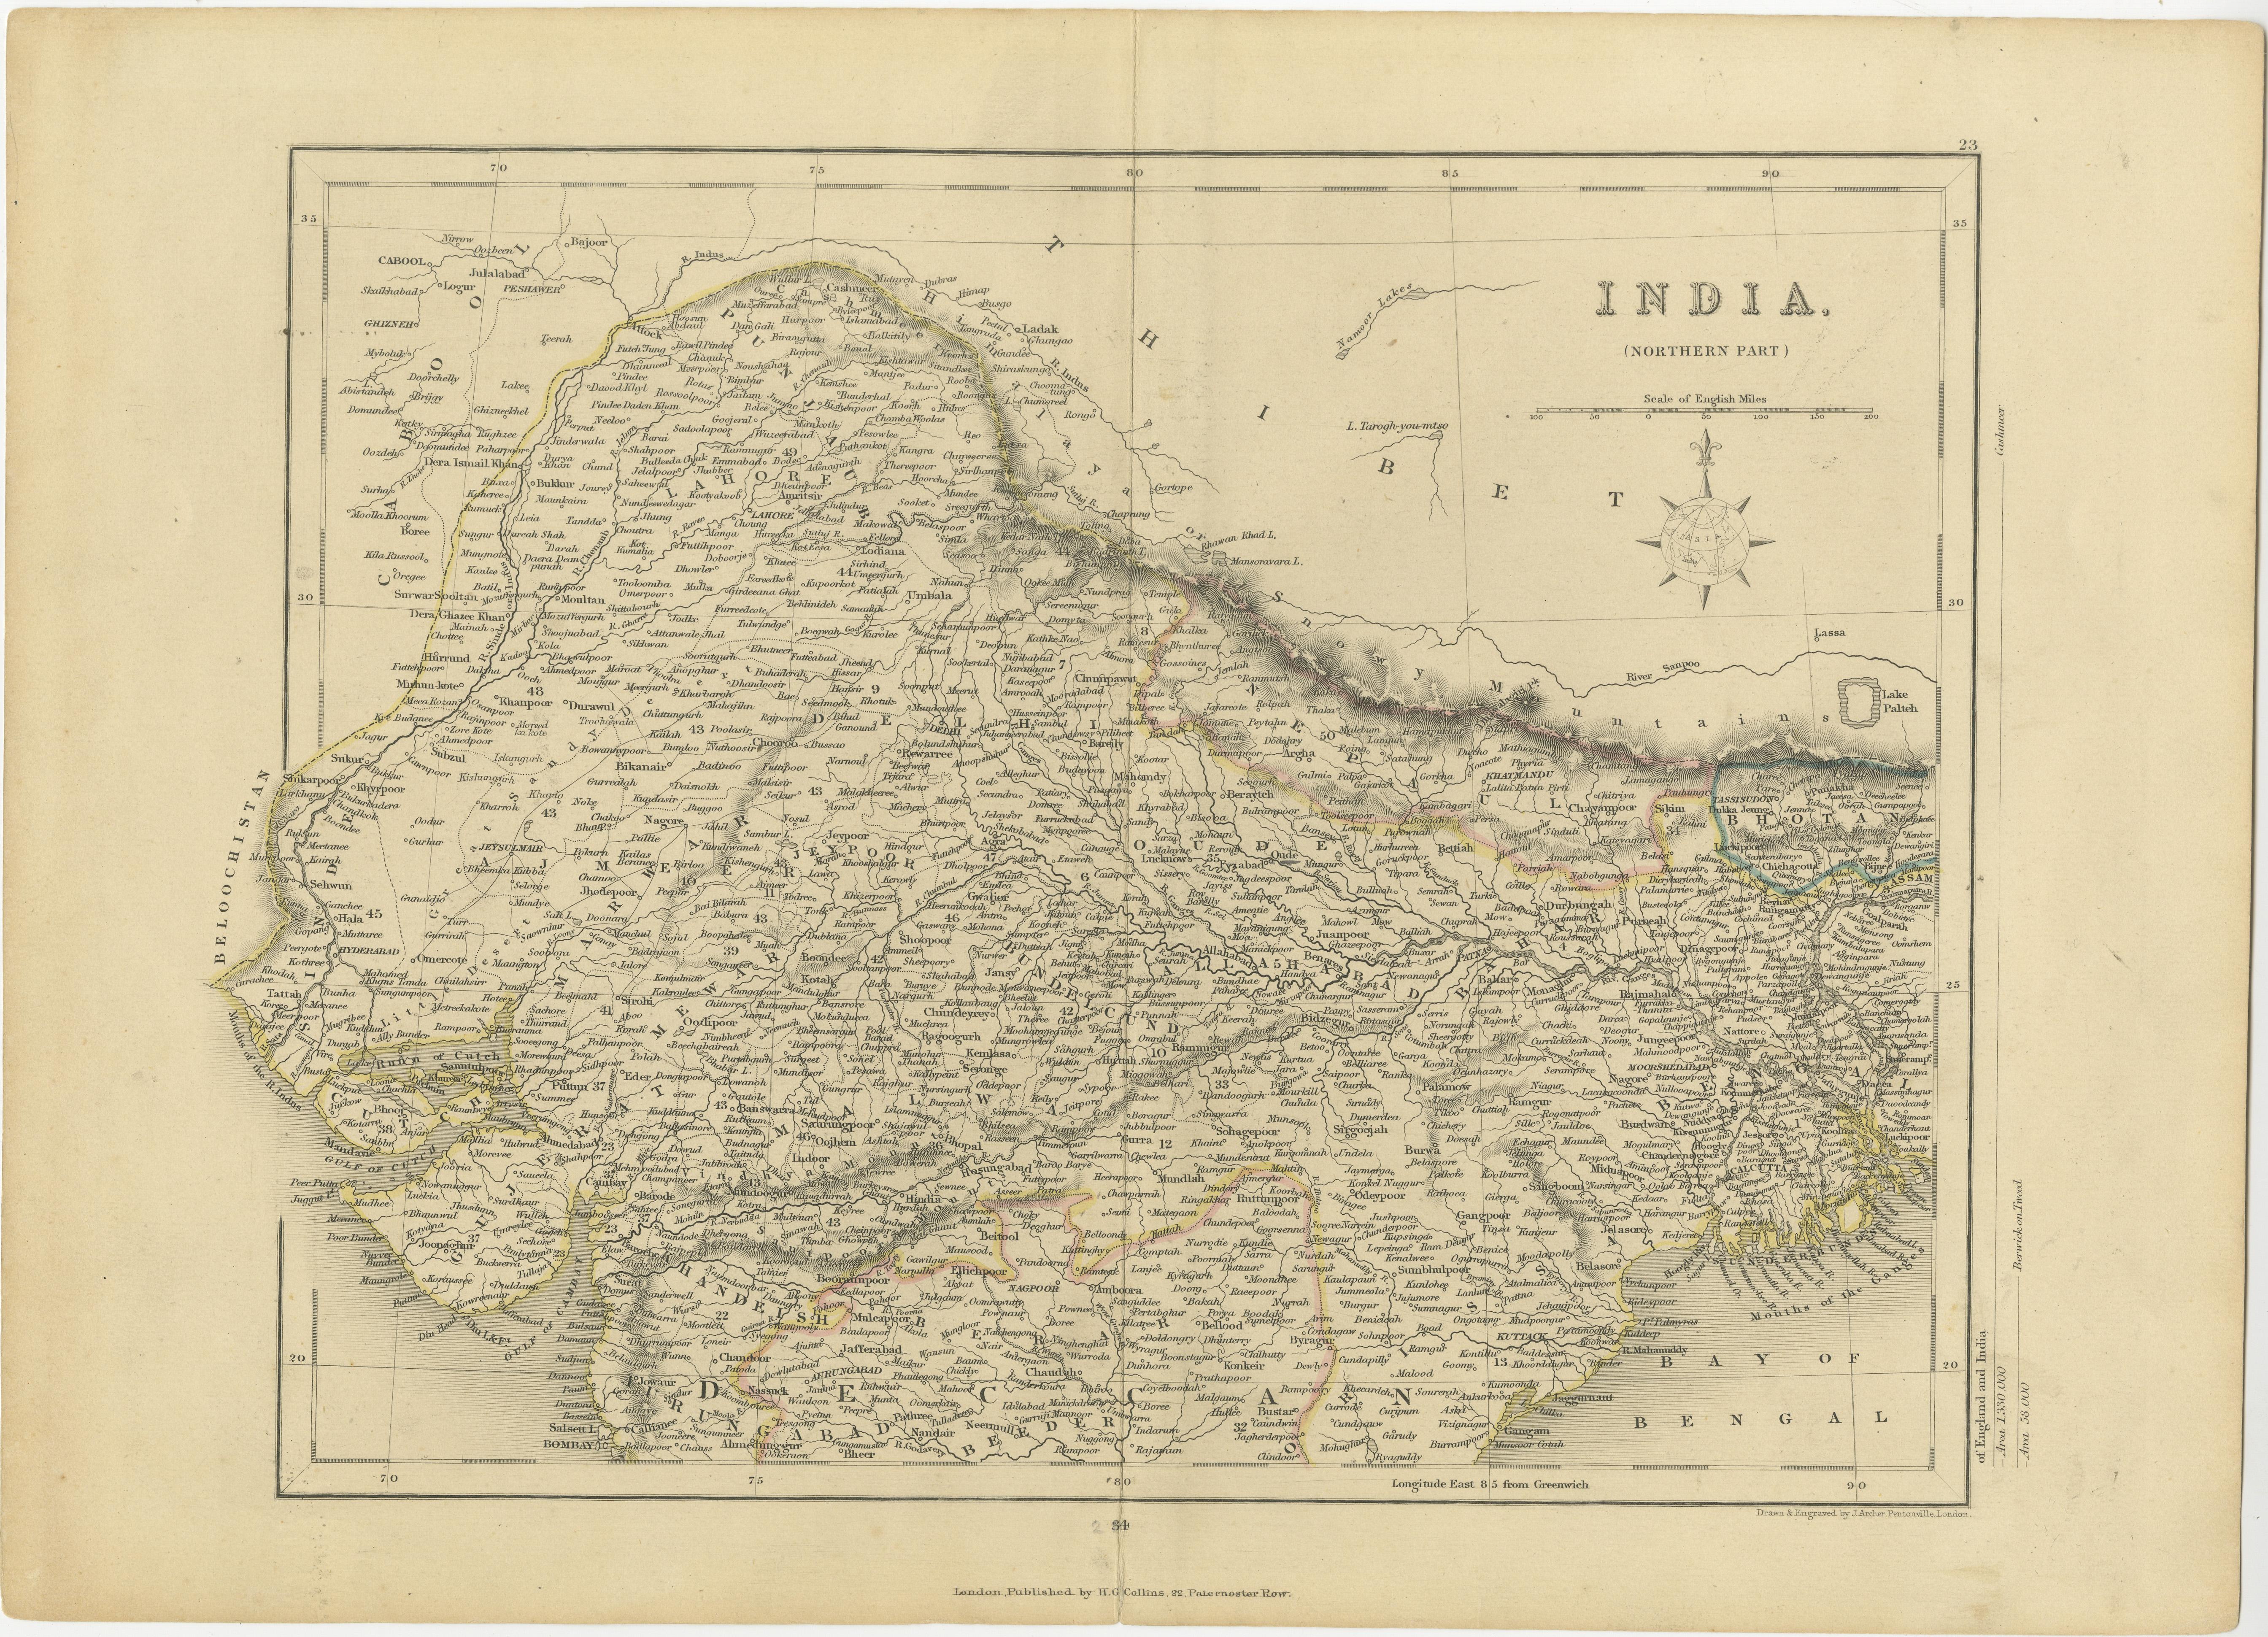 Antique map titled 'India. Northern Part'. Original antique map of Northern India. Drawn and engraved by J. Archer. Publishes by H.G. Collins, circa 1850. 